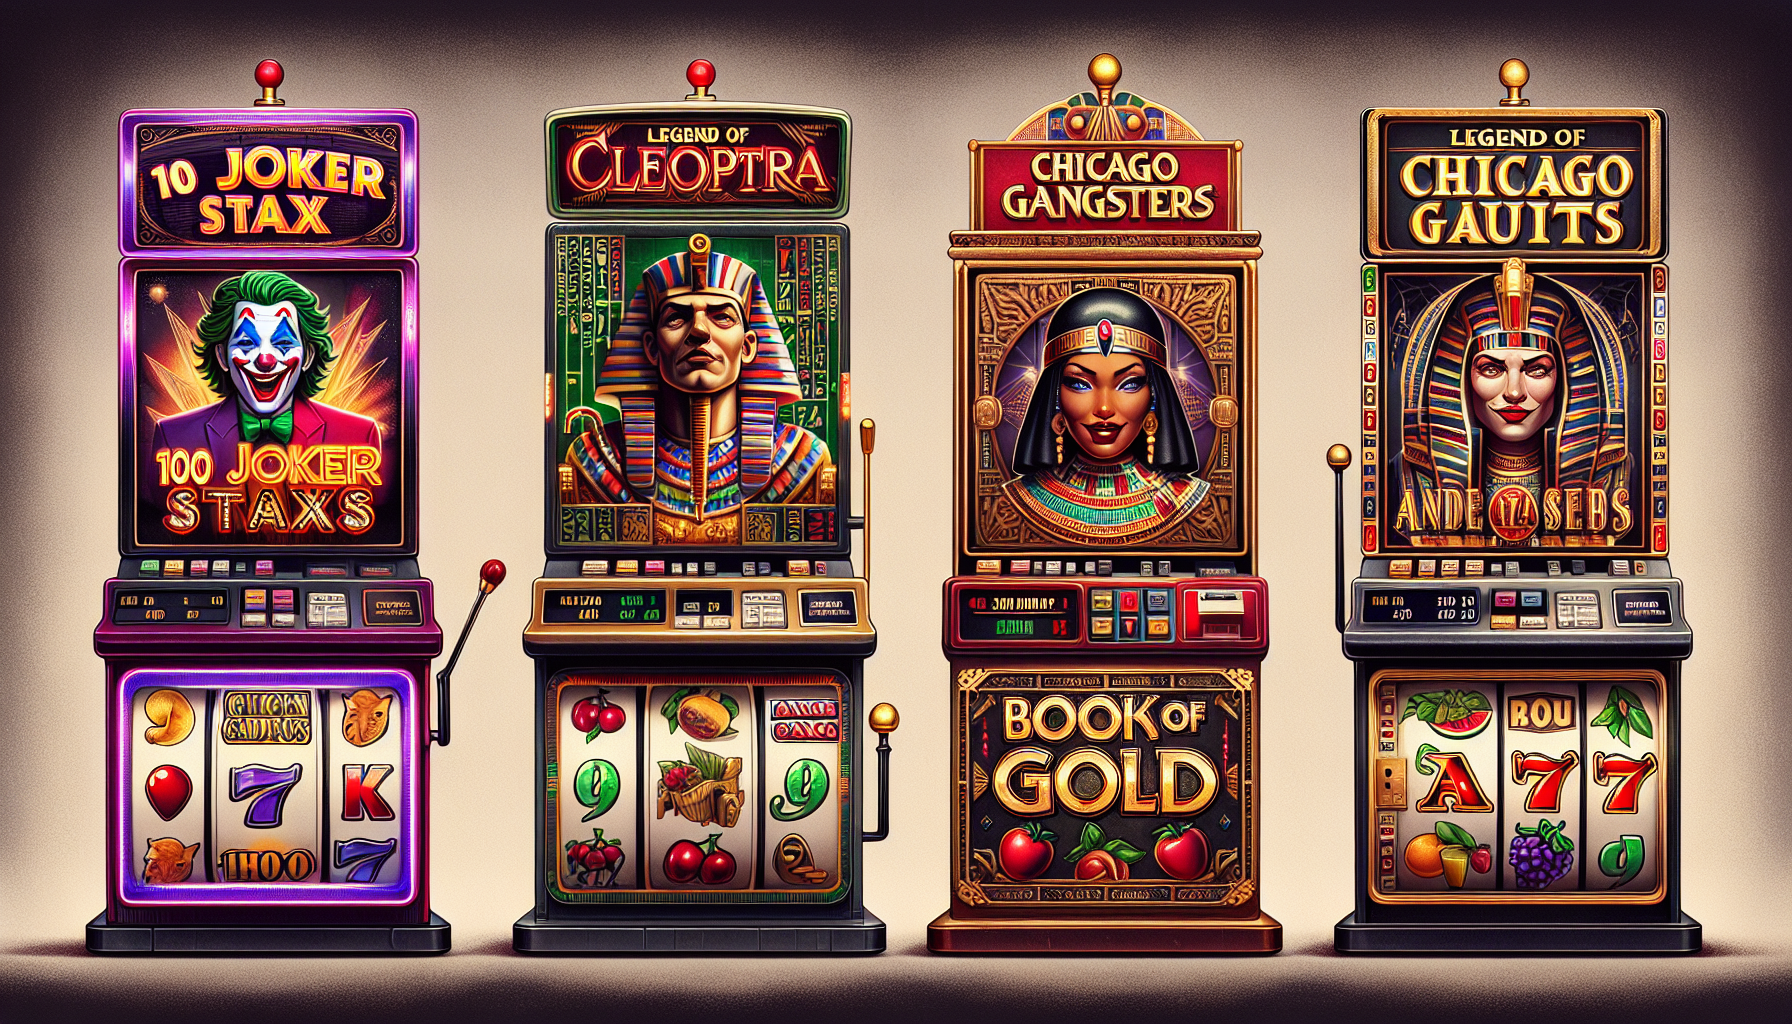 Top 5 Playson Slot Games: 100 Joker Staxx, Legend of Cleopatra, Chicago Gangsters, Book of Gold: Symbol Choice, and Sevens & Fruits